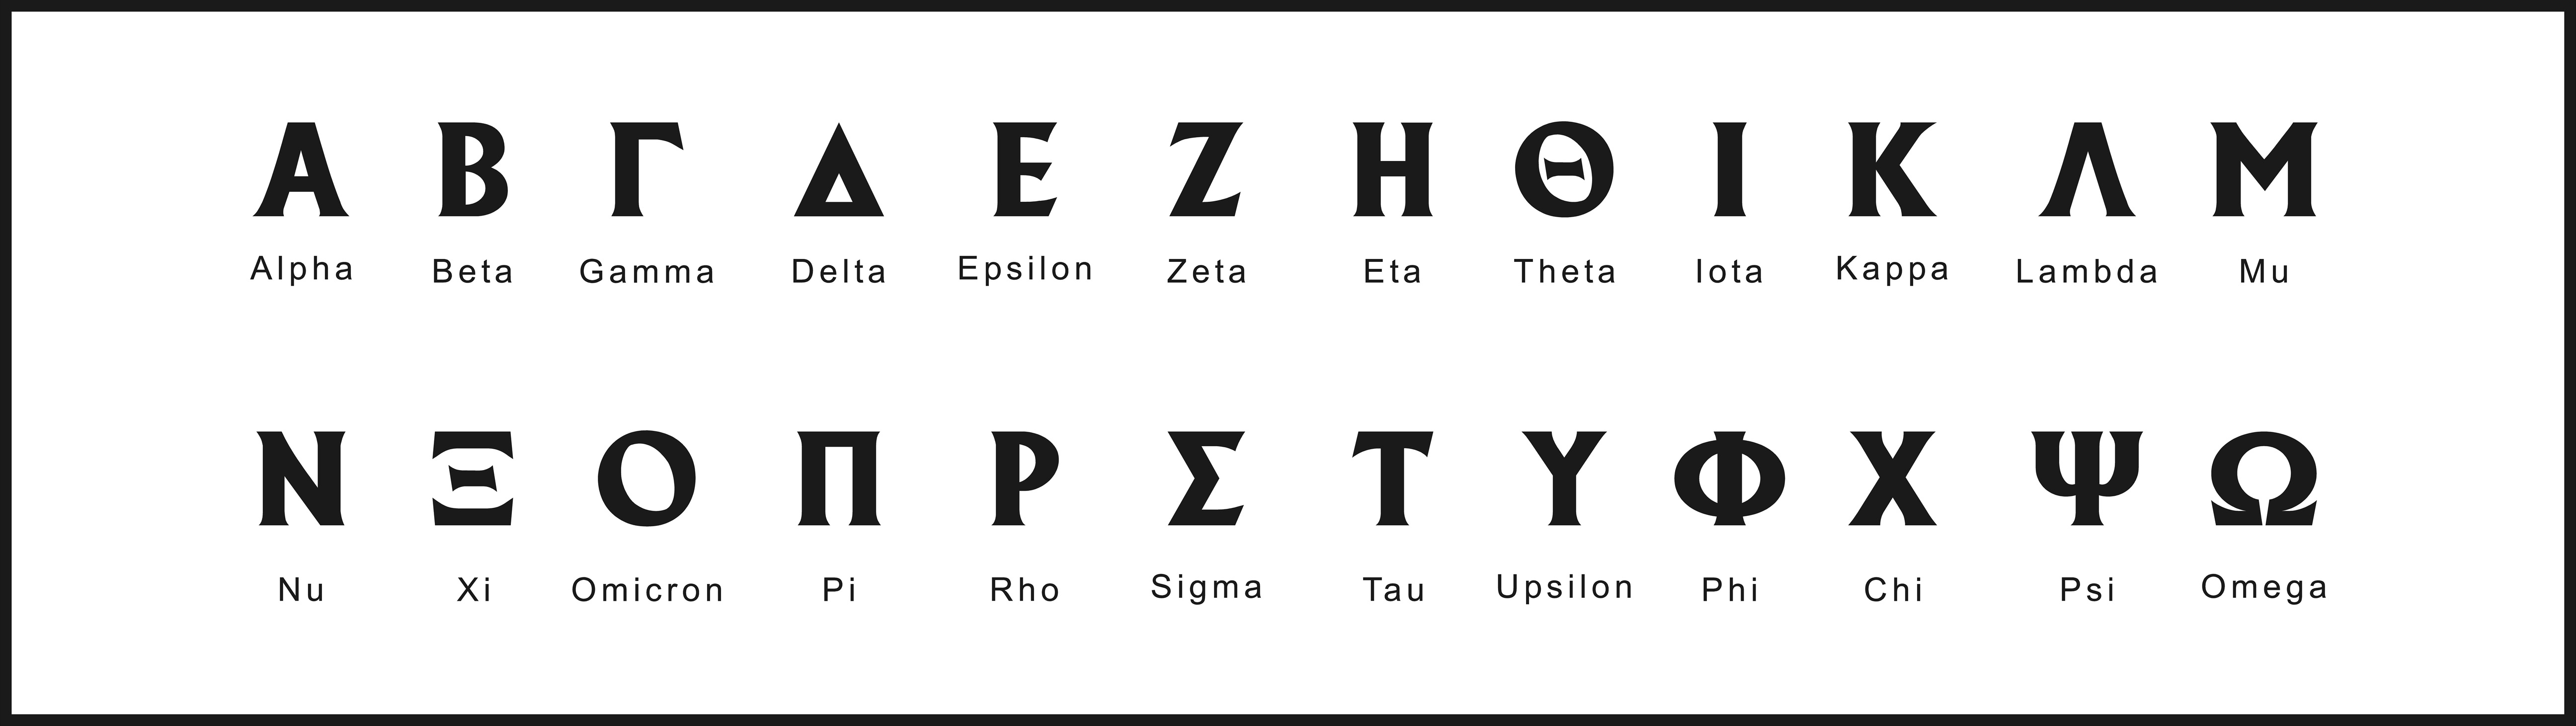 How Many Letters Are There in The Greek Alphabet? | How Many Are There